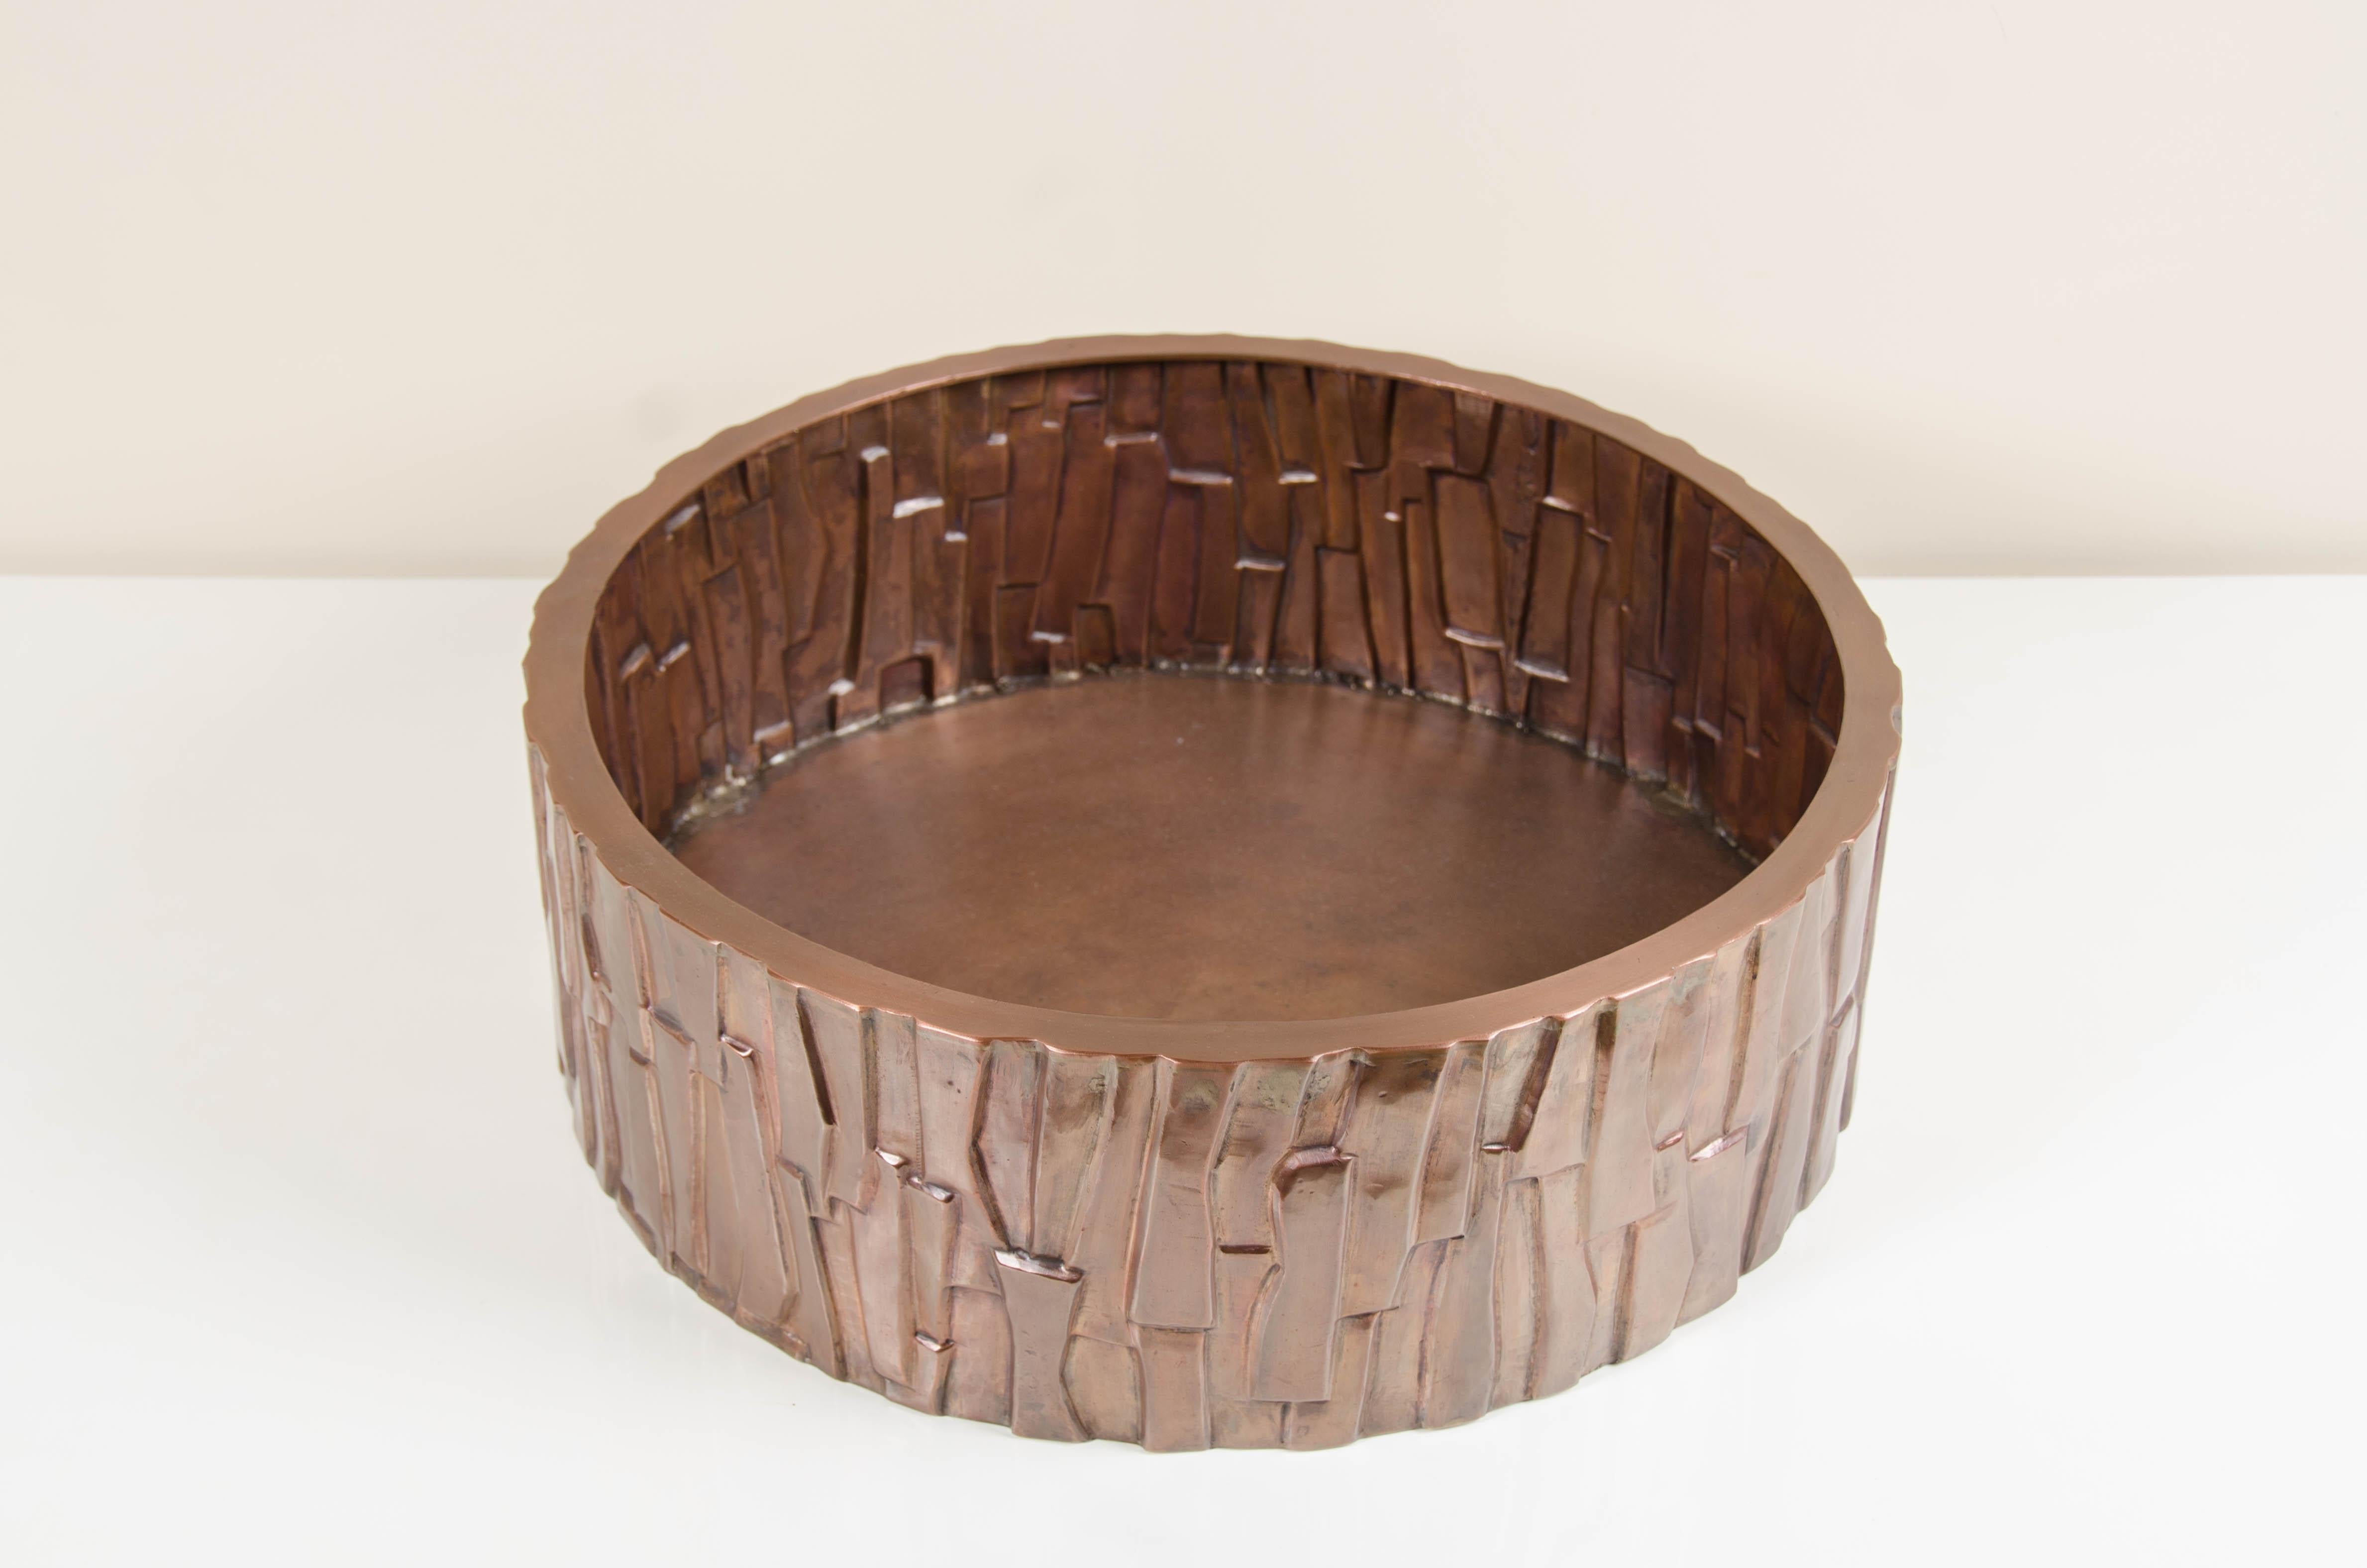 Kuai Design Low Cachepot, Copper by Robert Kuo, Hand Repoussé, Limited Edition In New Condition For Sale In Los Angeles, CA